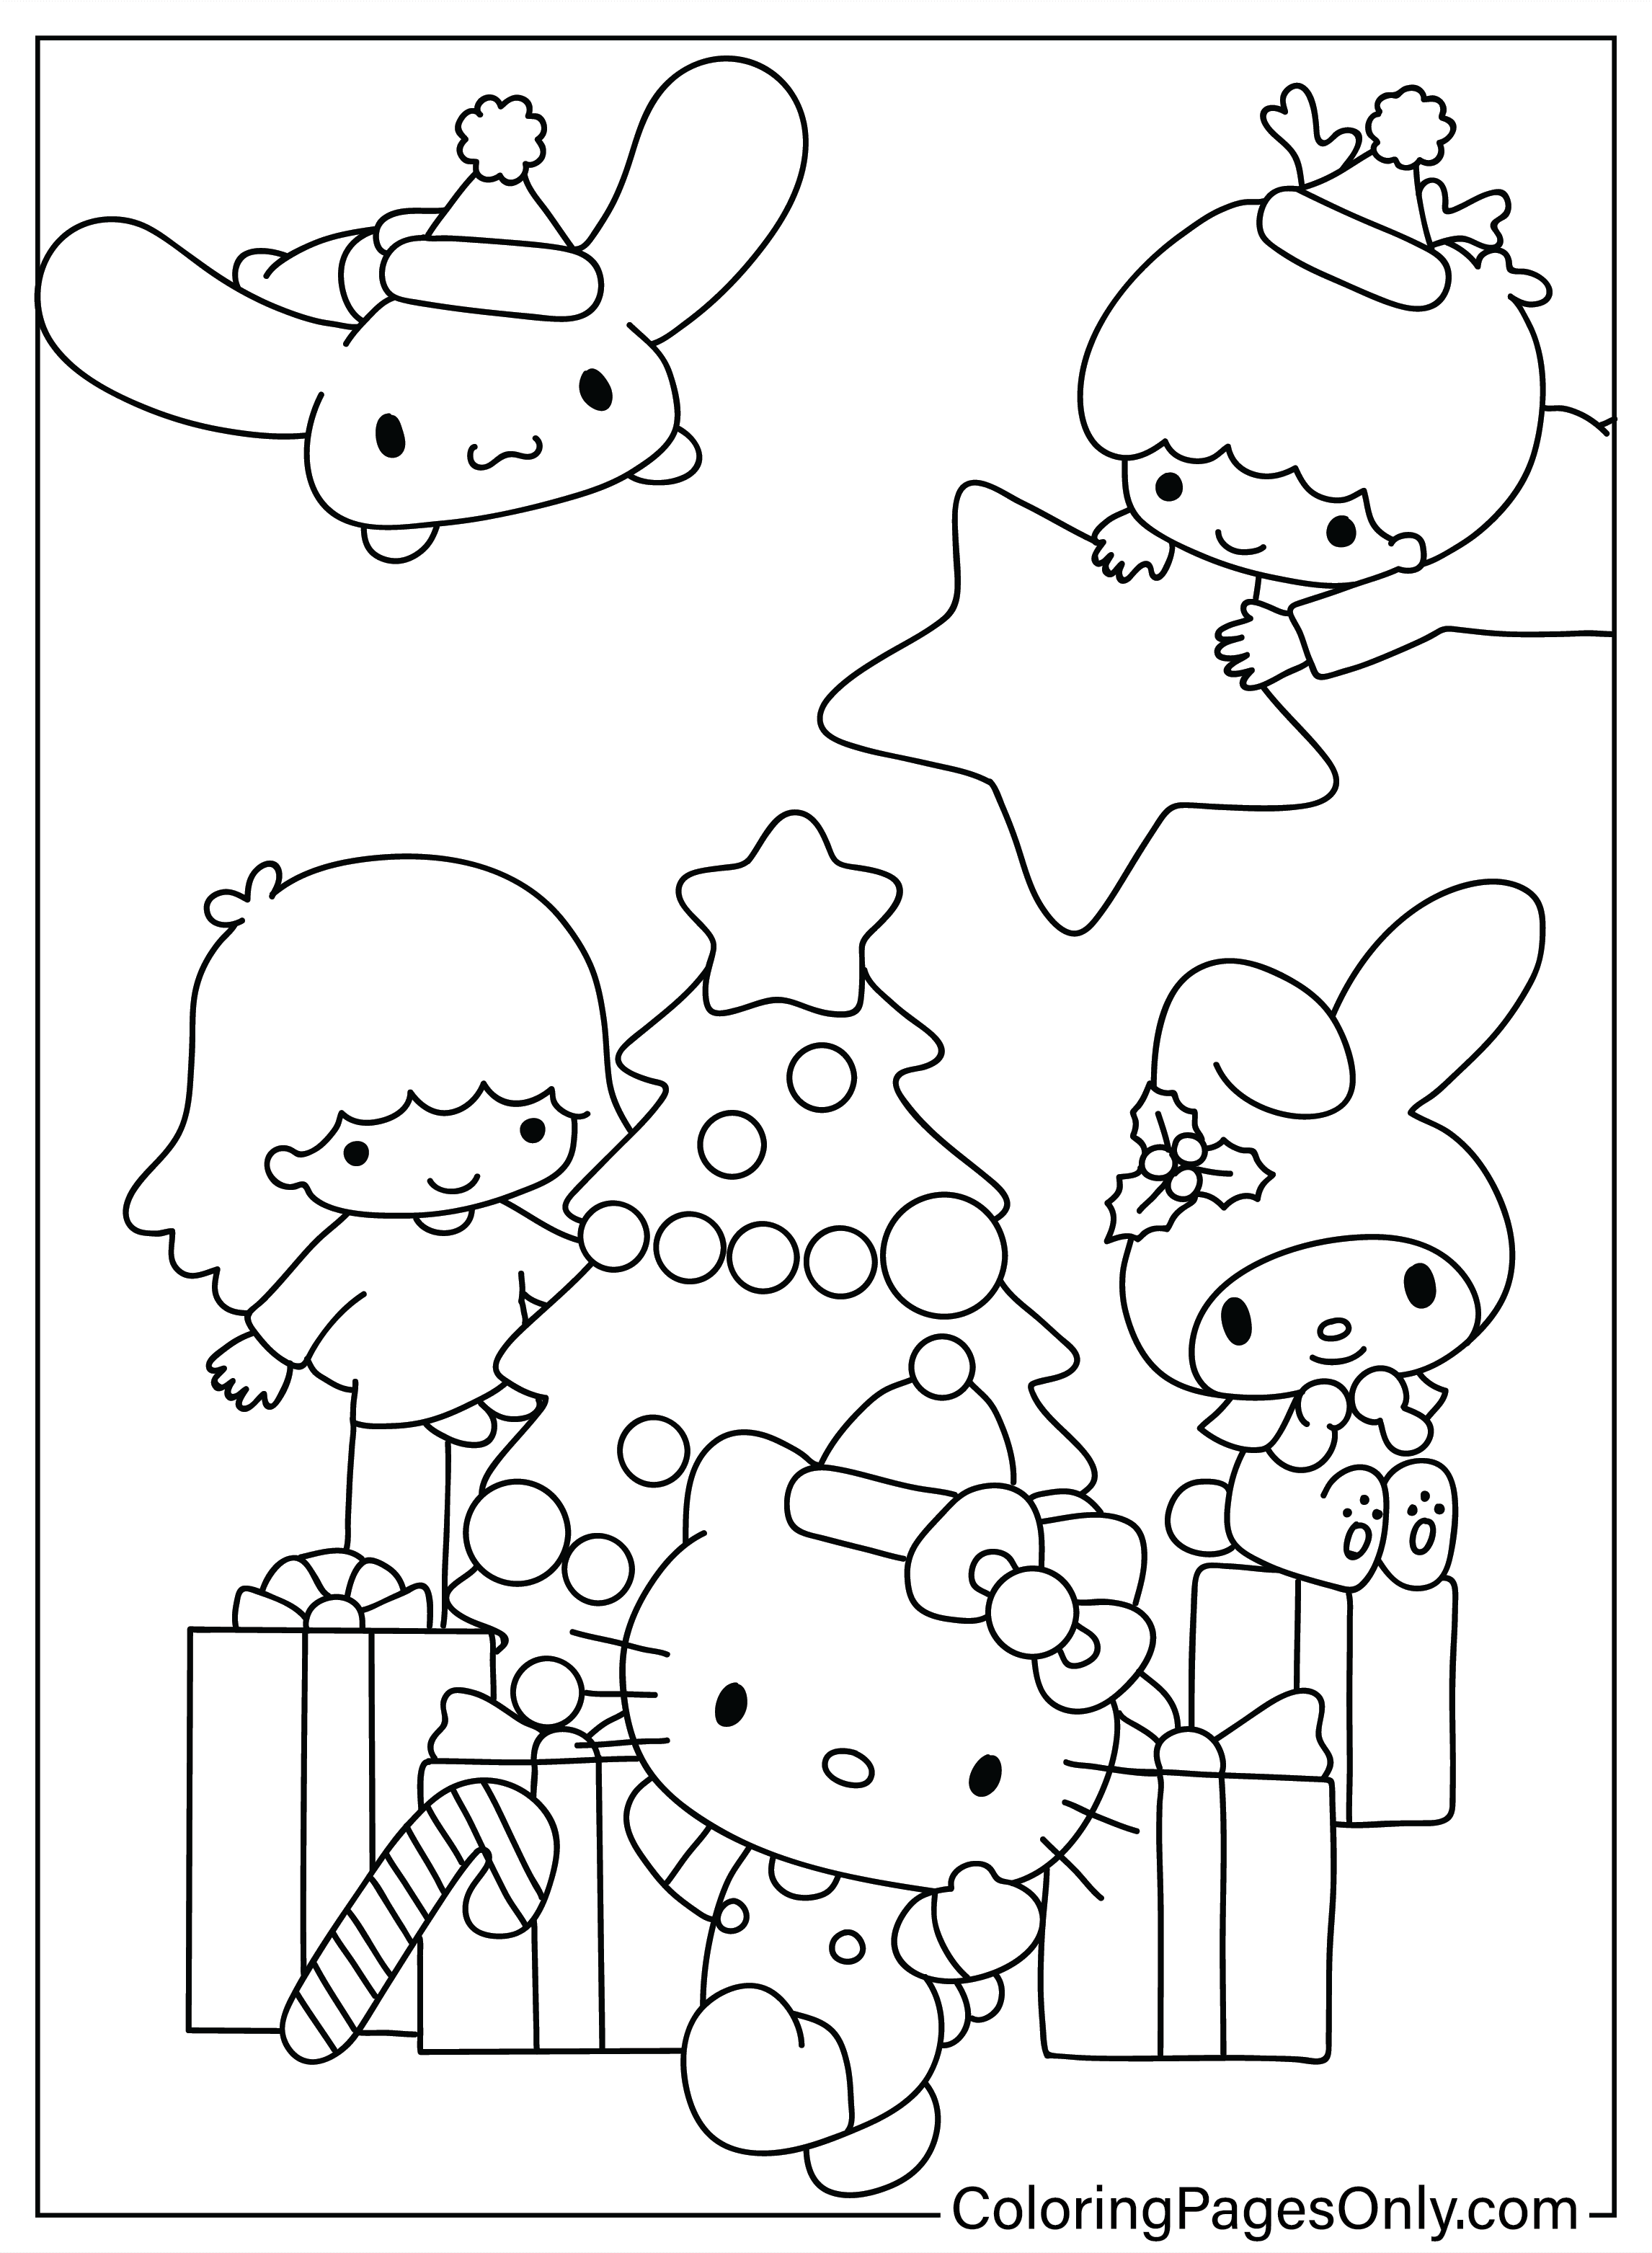 Coloring pages only on x ð ð christmas coloring pages ðhttpstcoqyeepien christmas xmas holidays winter gifts spreadthecheer cartoon coloringpagesonly coloringpages coloringbook art fanart sketch drawing draw coloring usa